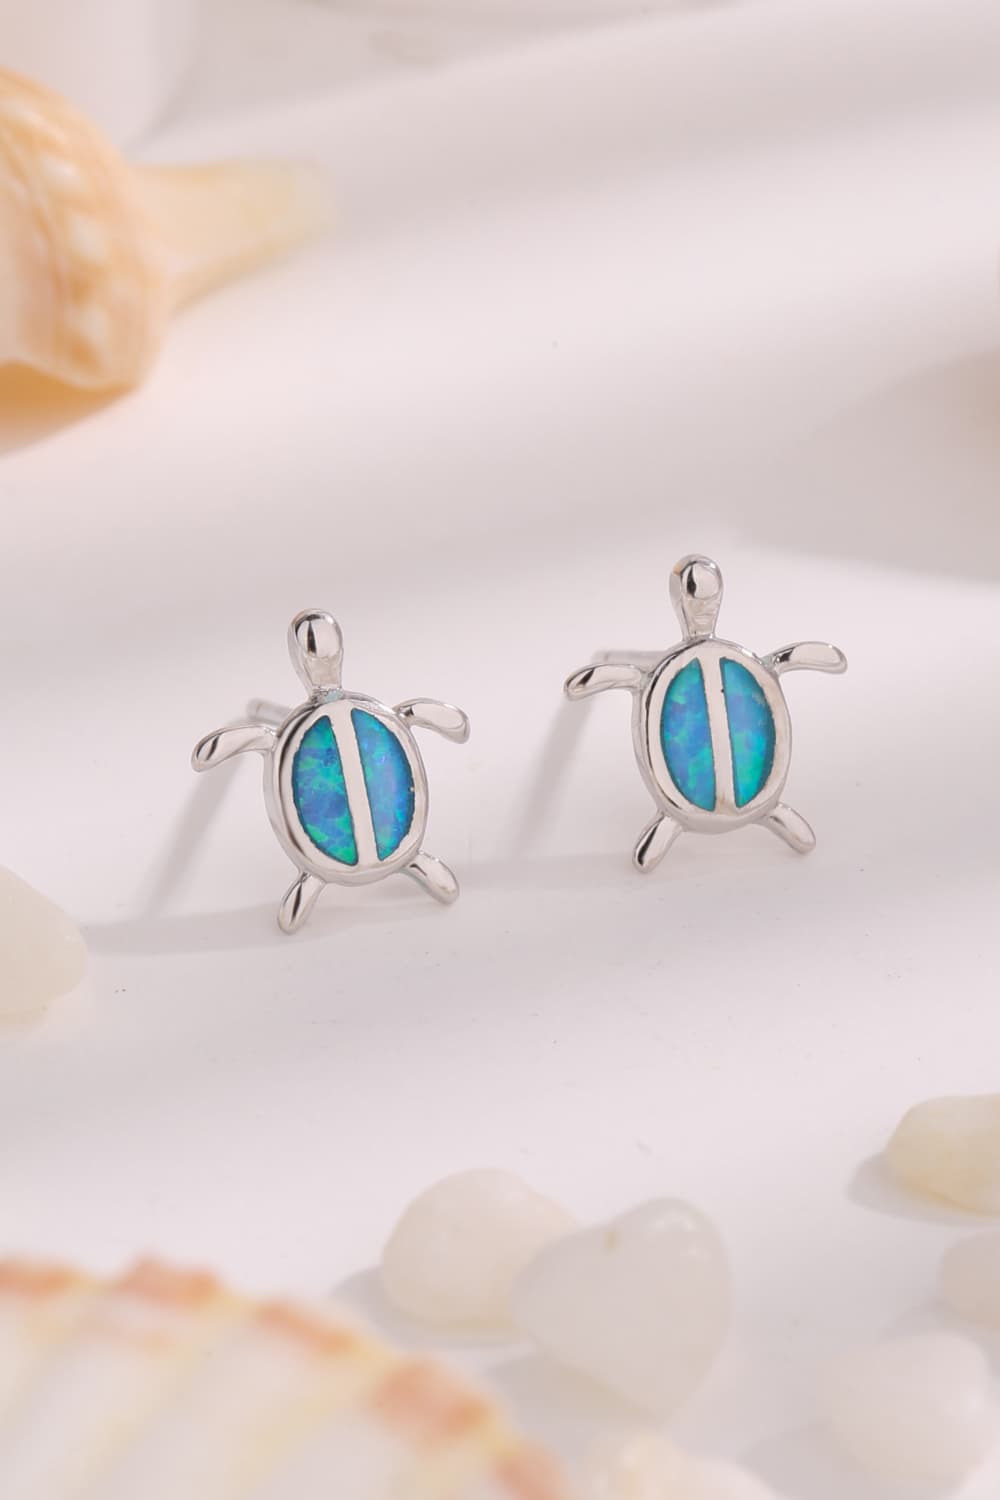 Opal Turtle 925 Sterling Silver Stud Earrings - Tophatter Shopping Deals - Electronics, Jewelry, Auction, App, Bidding, Gadgets, Fashion